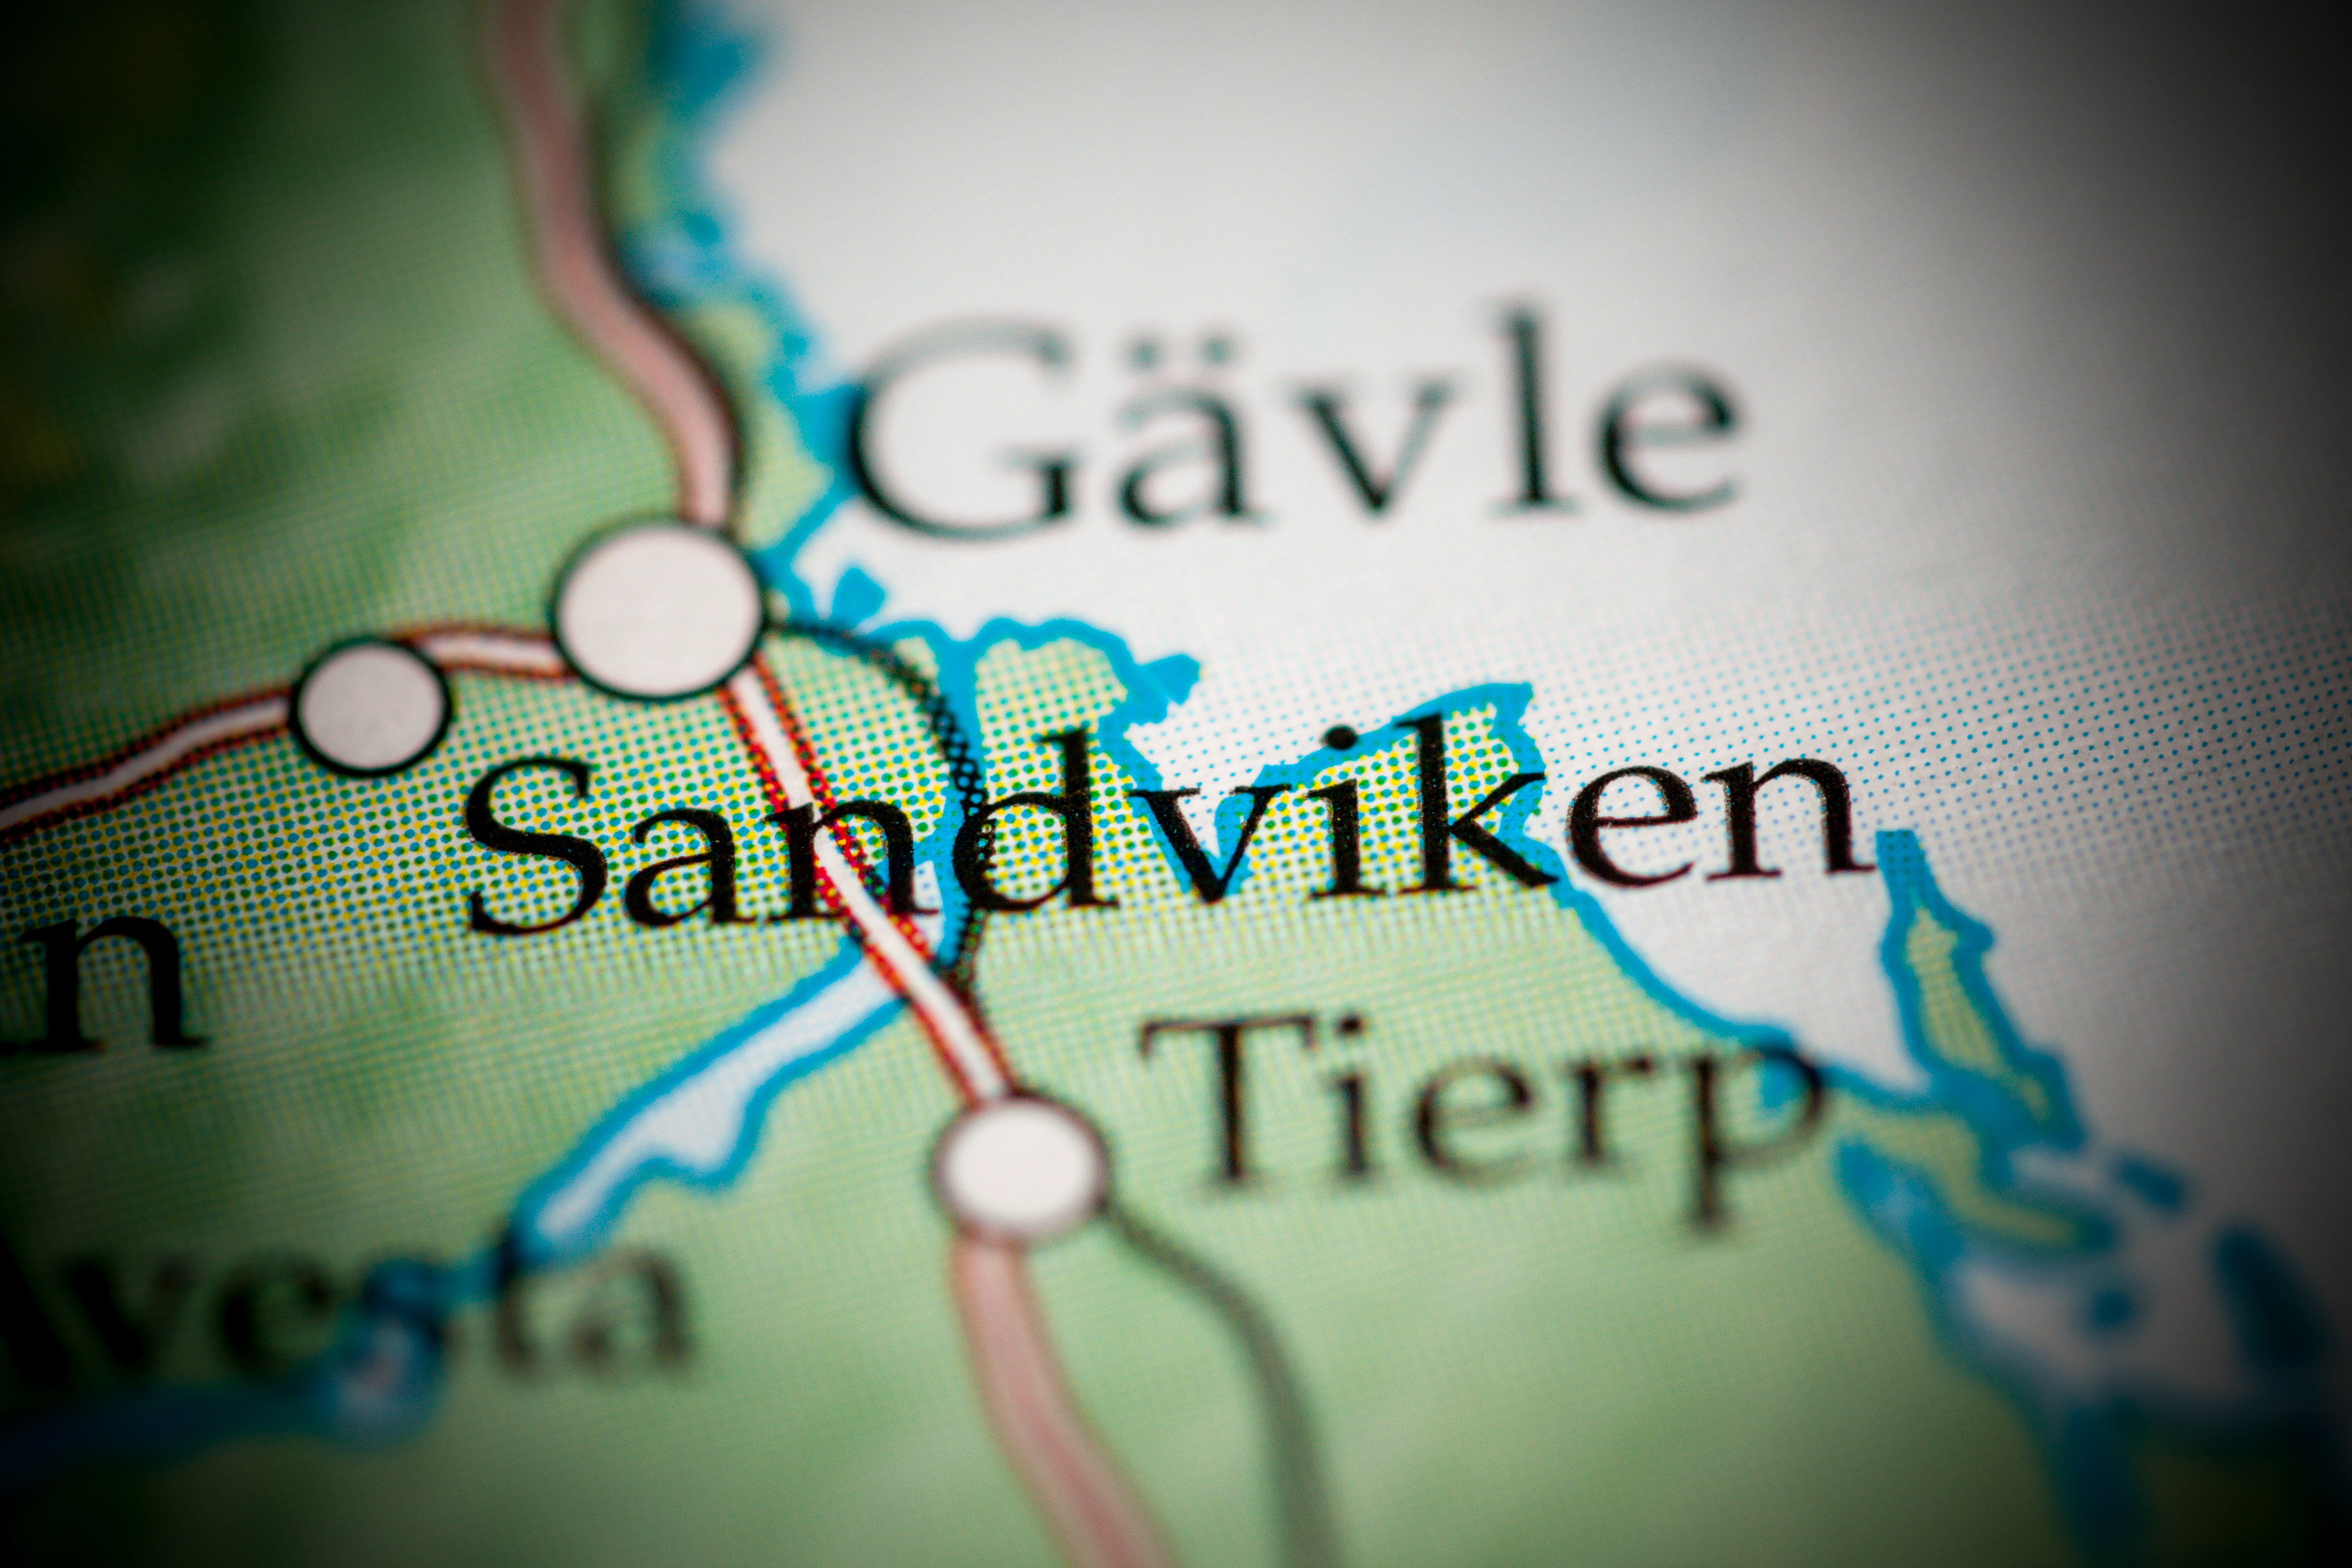 The facility will be located in Sandviken, Sweden.